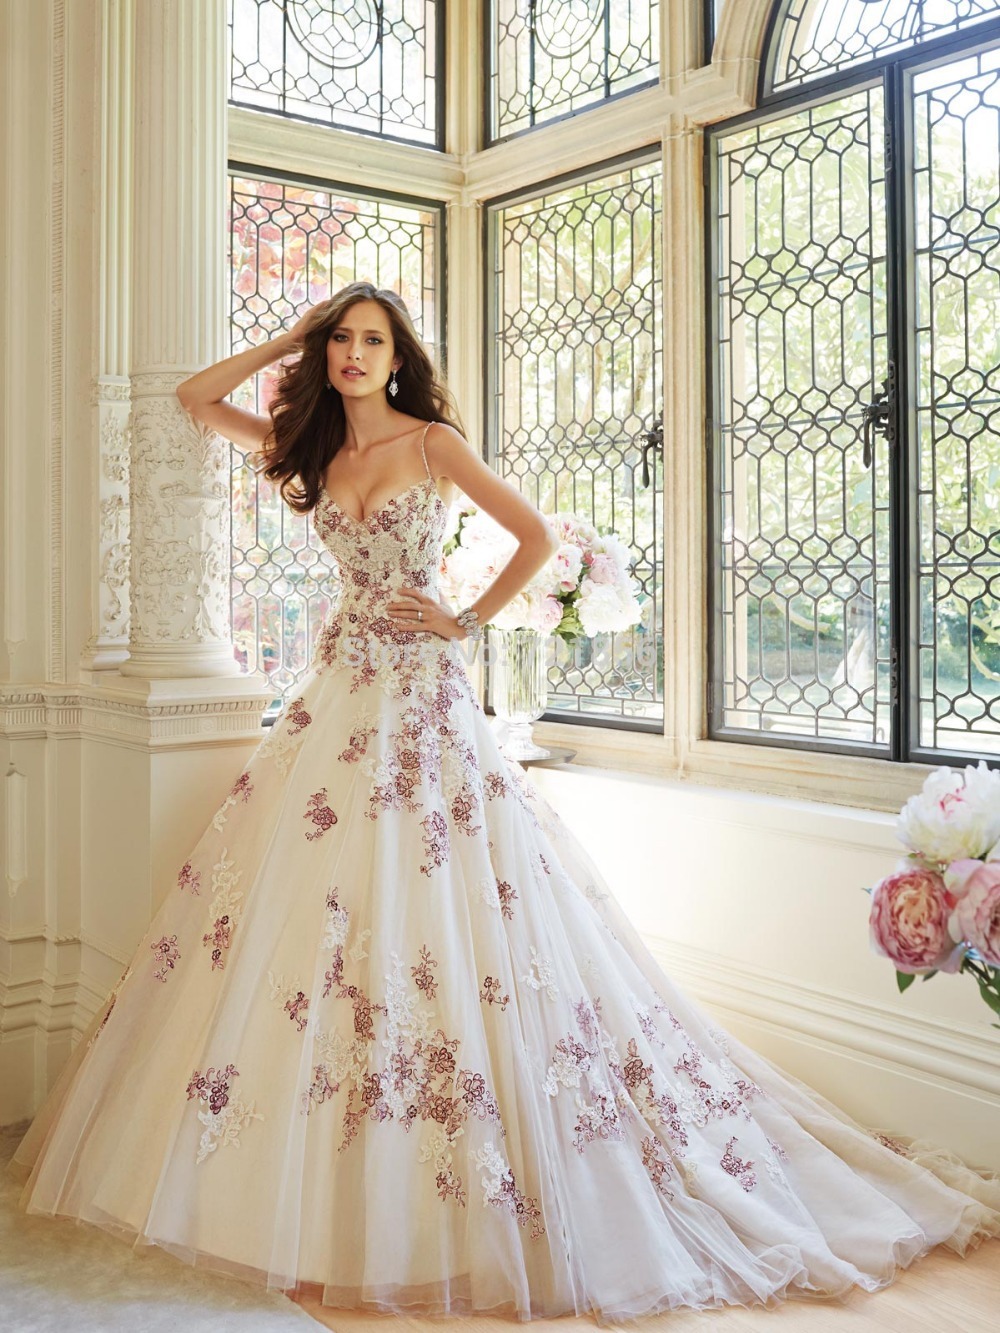 Ultimate and Outstanding Unique Wedding Dresses